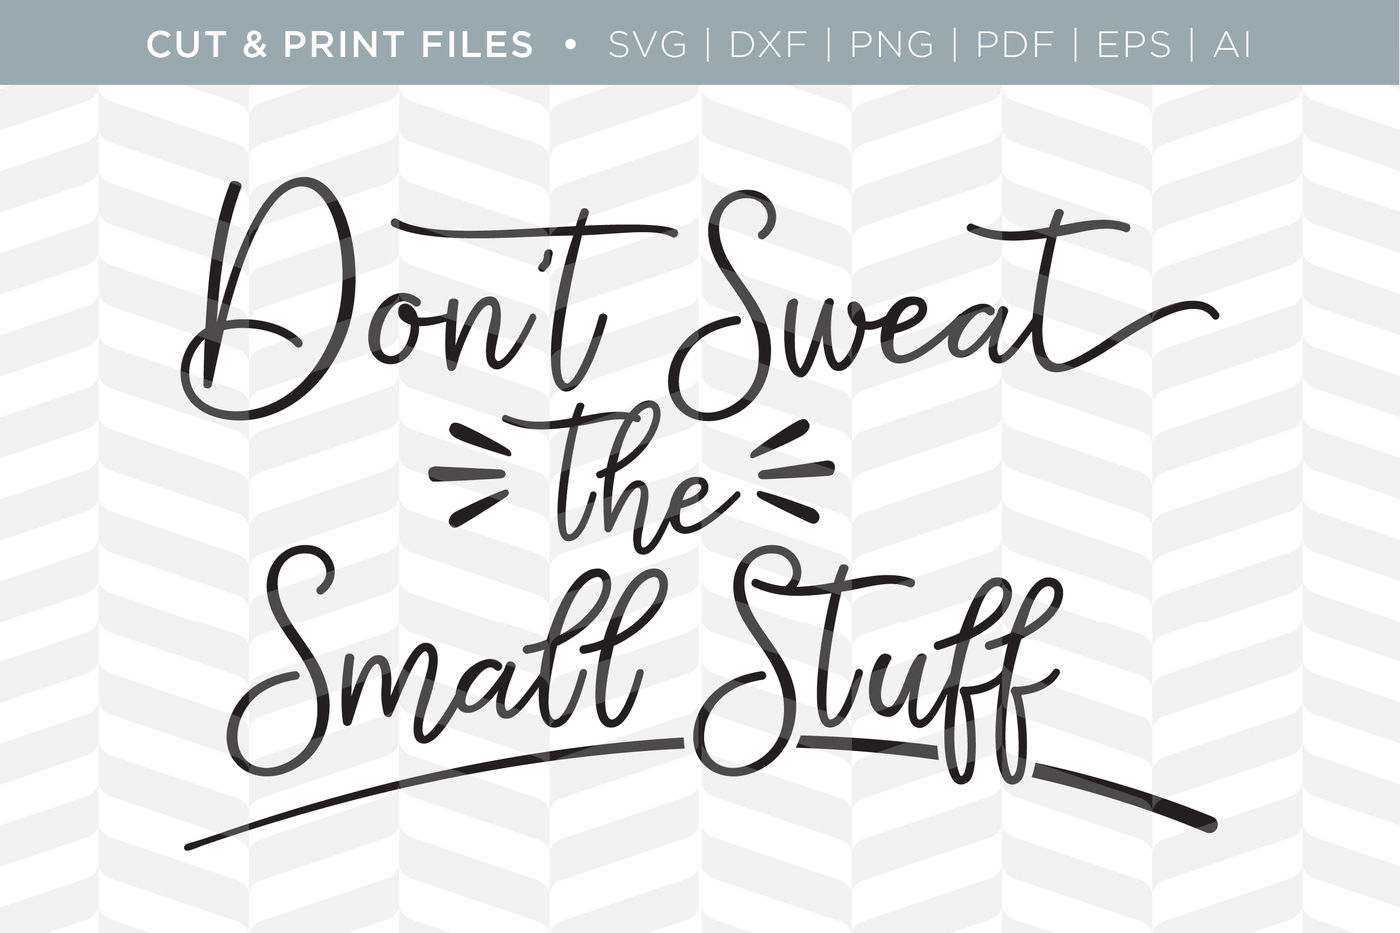 Don T Sweat The Small Stuff Dxf Svg Png Pdf Cut Print Files By Simply Bright Studio Thehungryjpeg Com